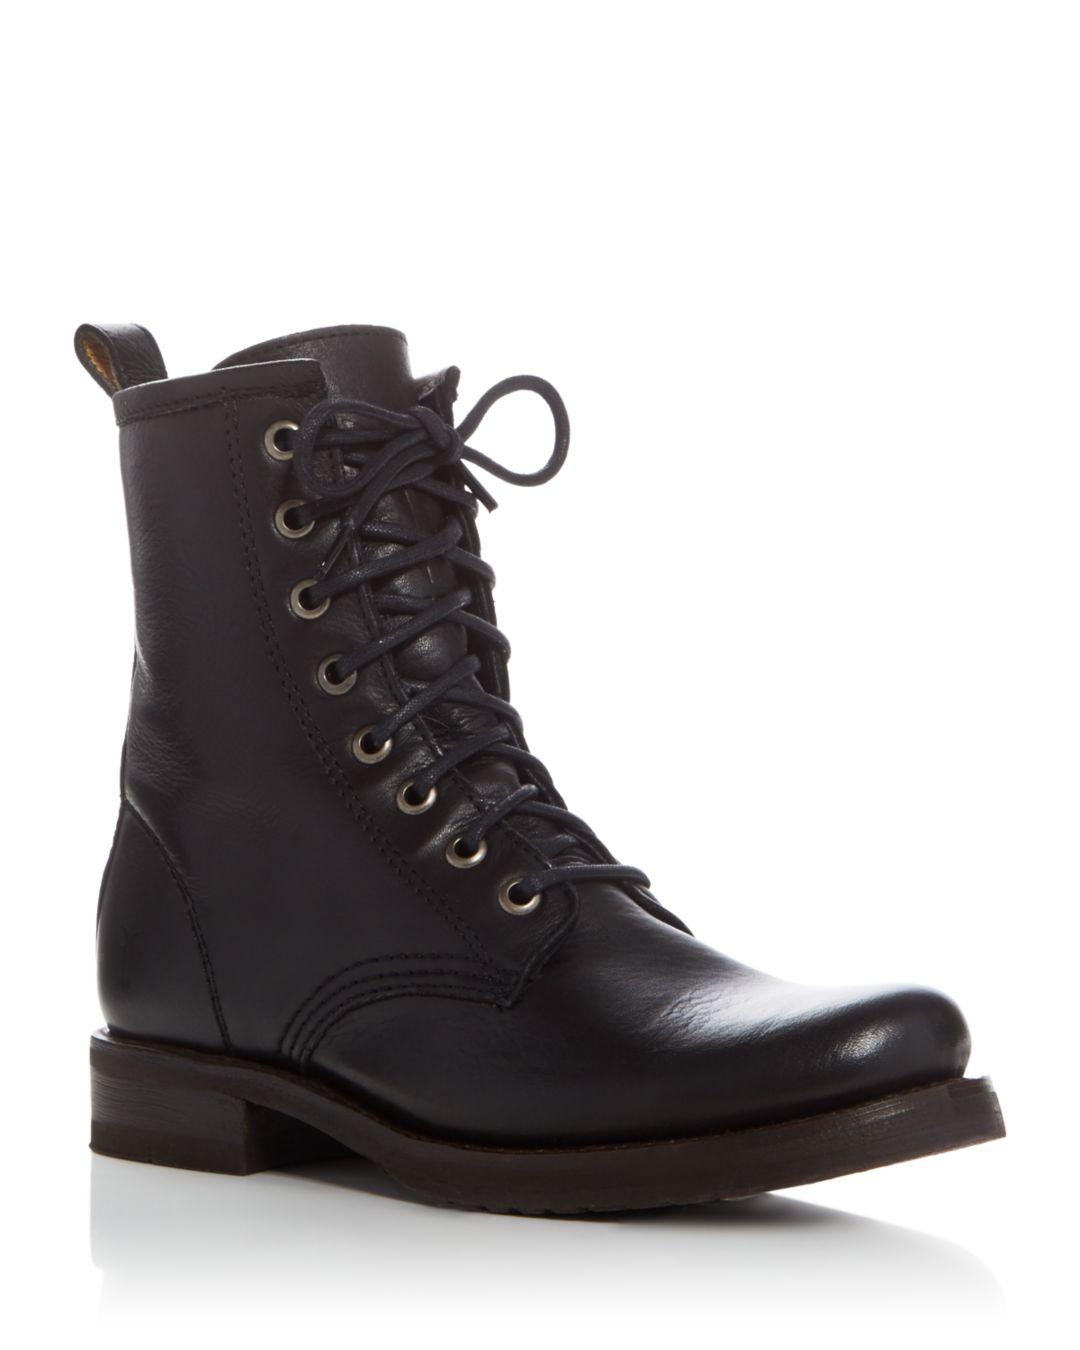 Frye Leather Veronica Combat Boots in Black - Save 74% - Lyst